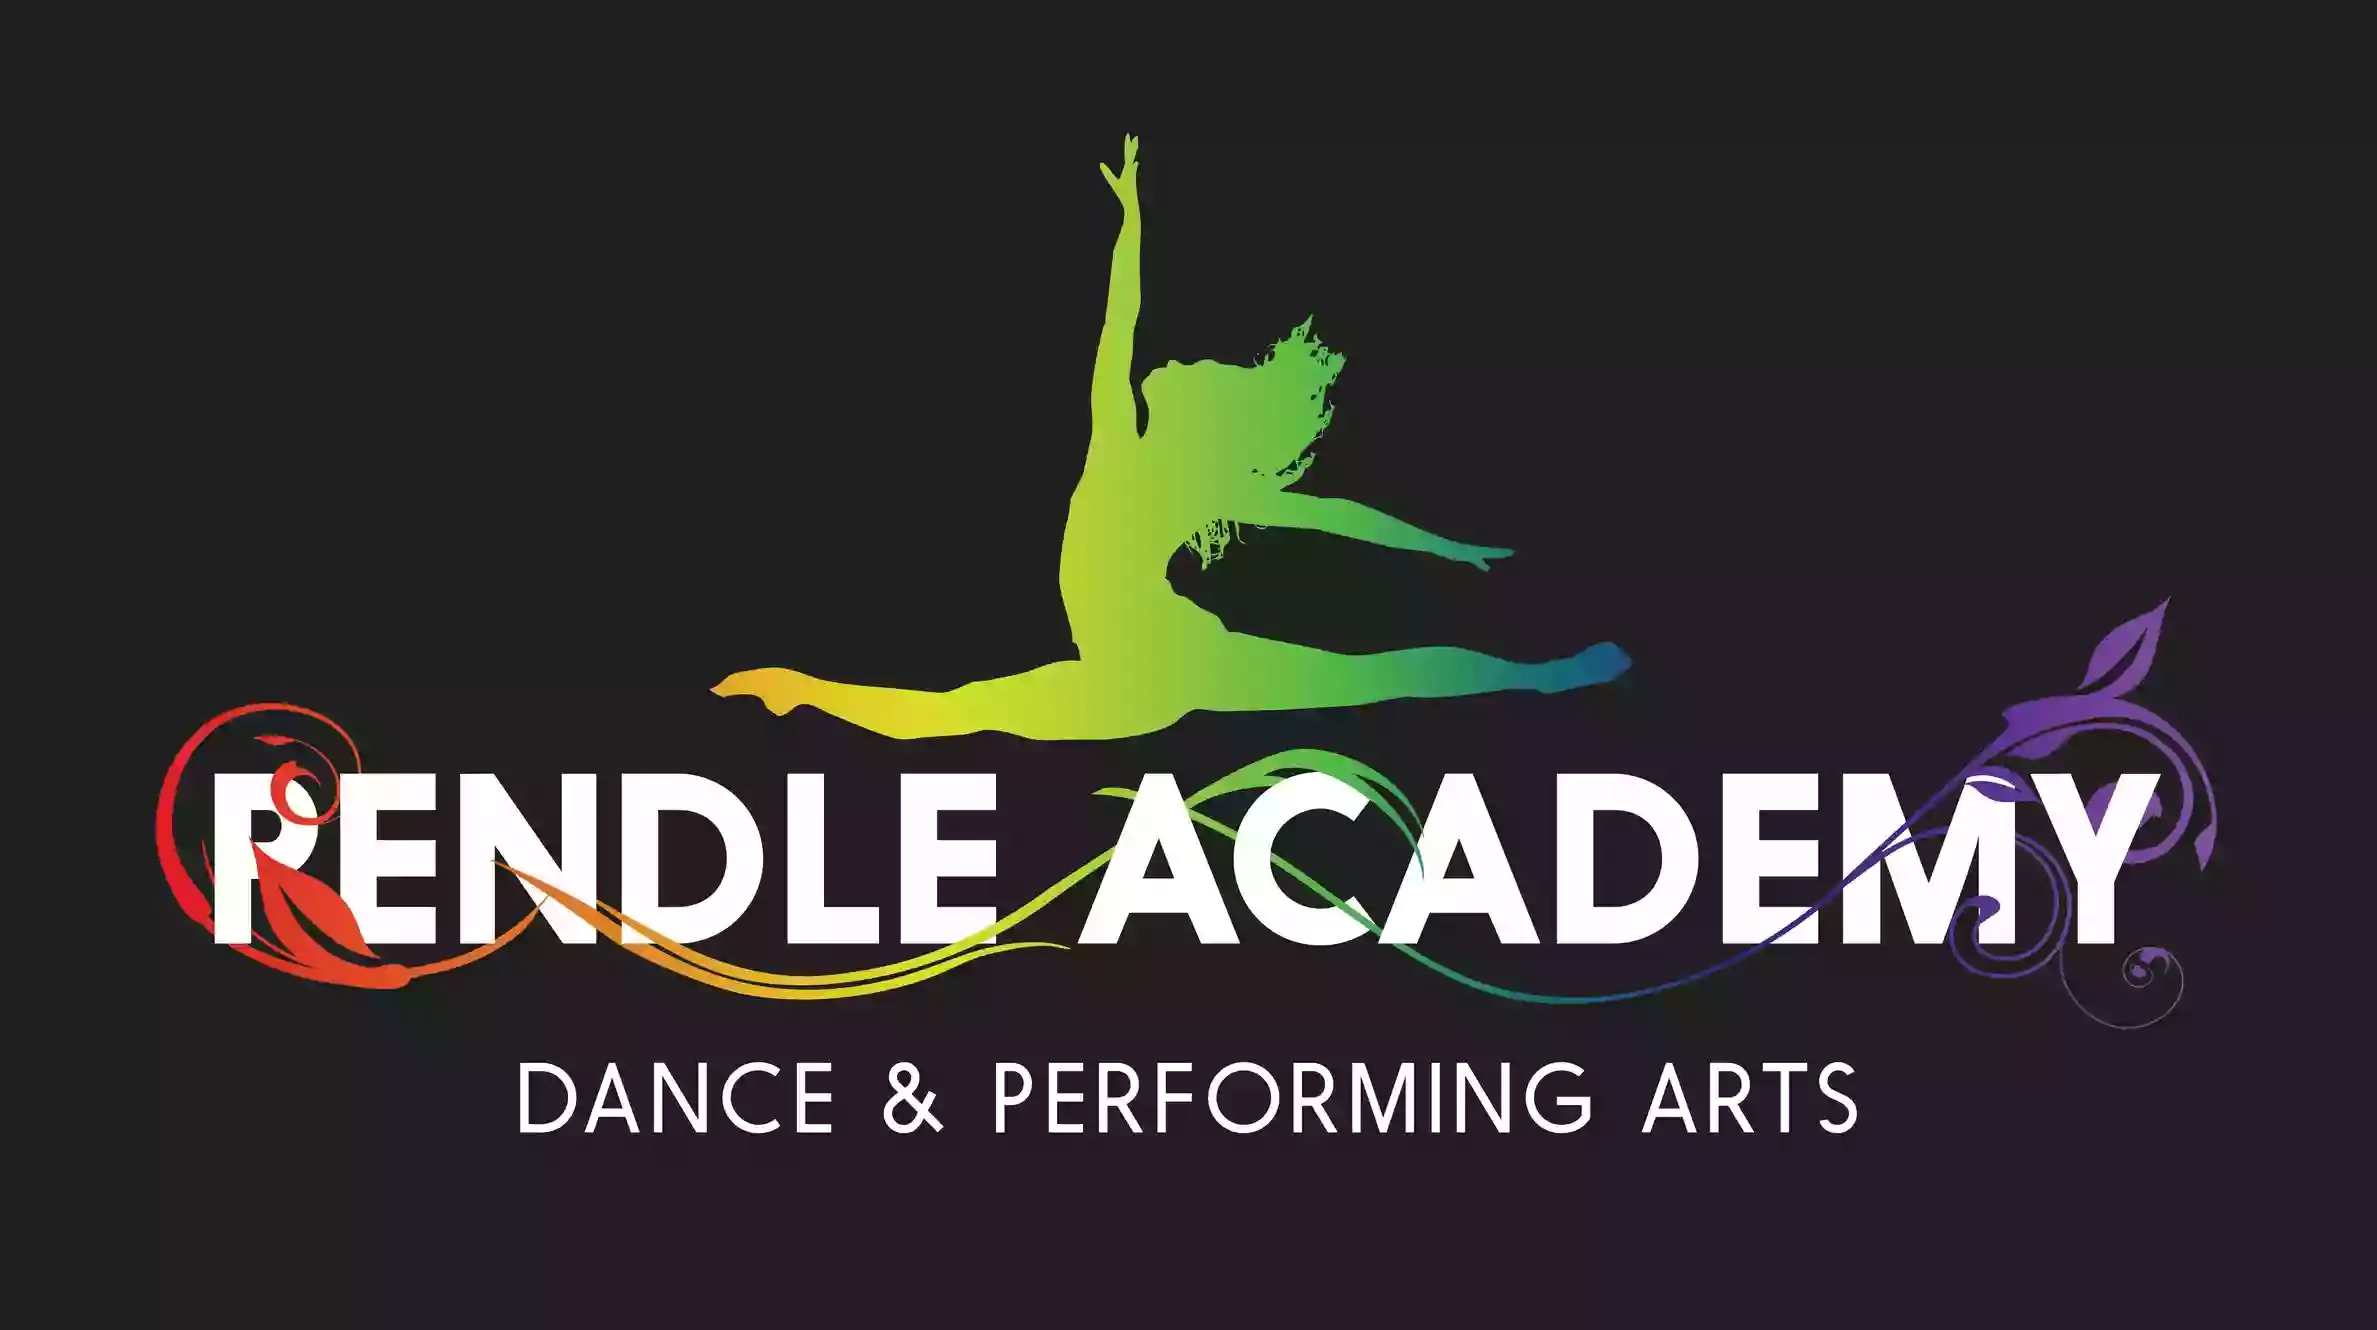 Pendle Academy of Dance & Performing Arts